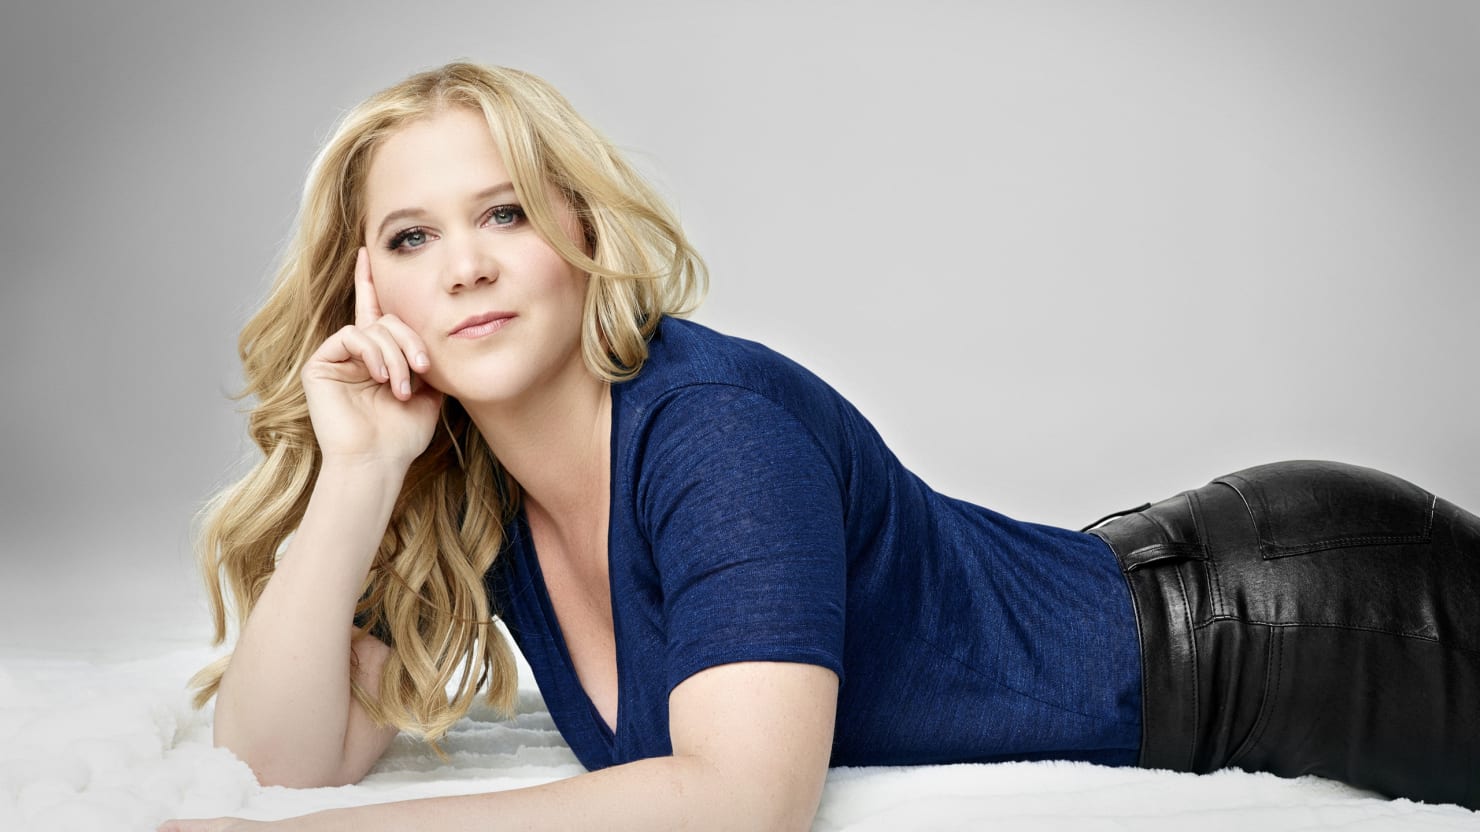 Amy Schumer Sex Tape - Comedy's R-Rated Queen Amy Schumer Is Raunchier Than Ever